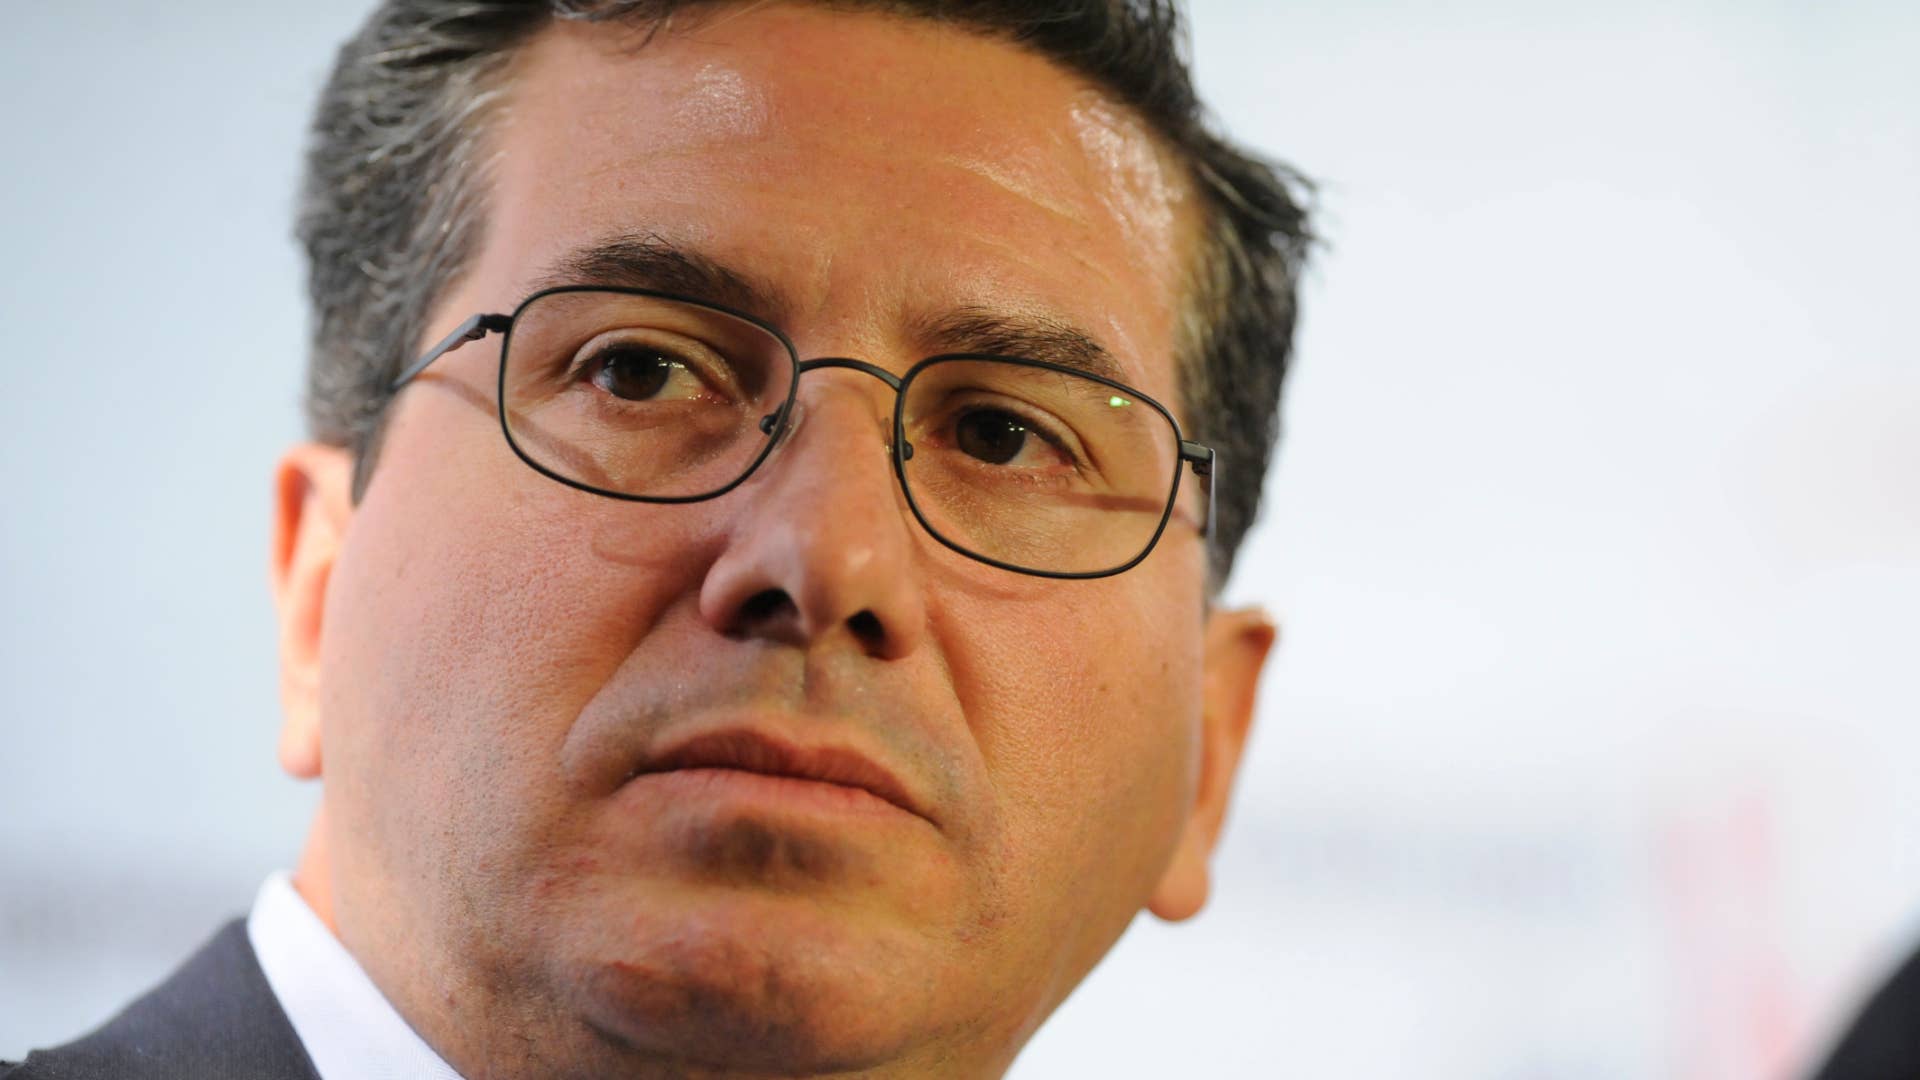 Dan Snyder takes part in a Washington Post Live discussion 'Scoring Big: The Business of Sports.'